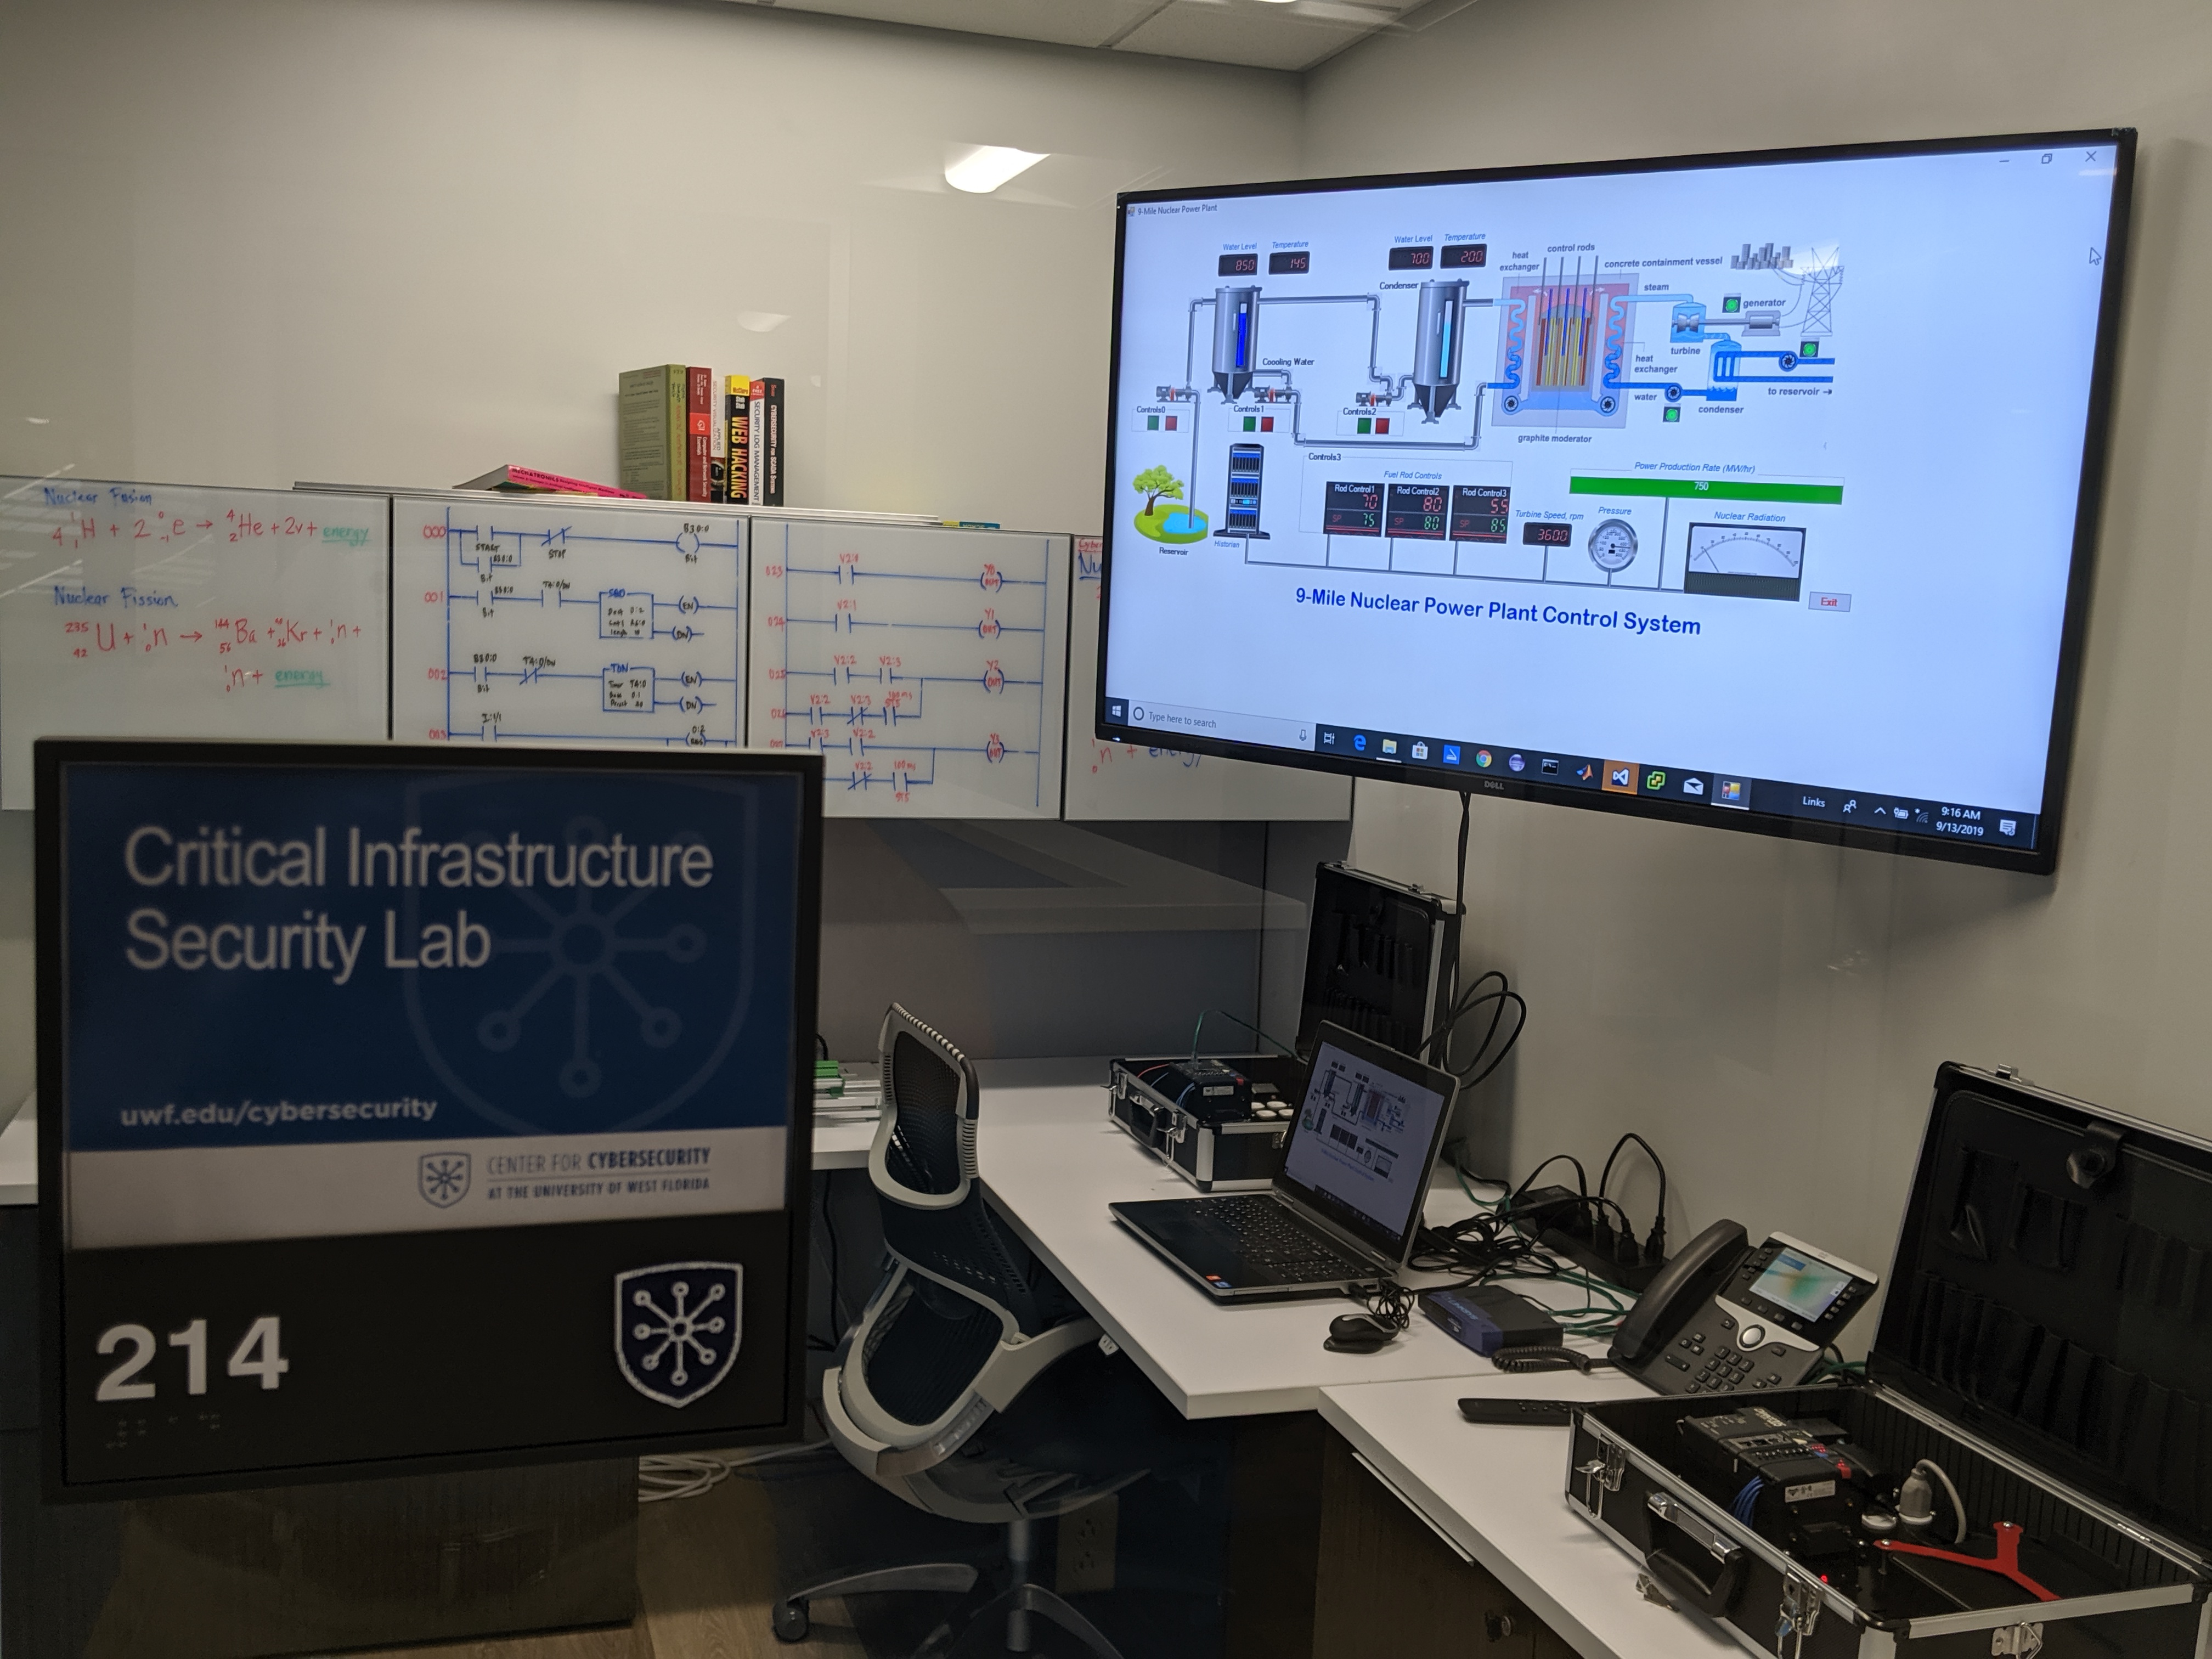 View of the Critical Infrastructure Security Lab